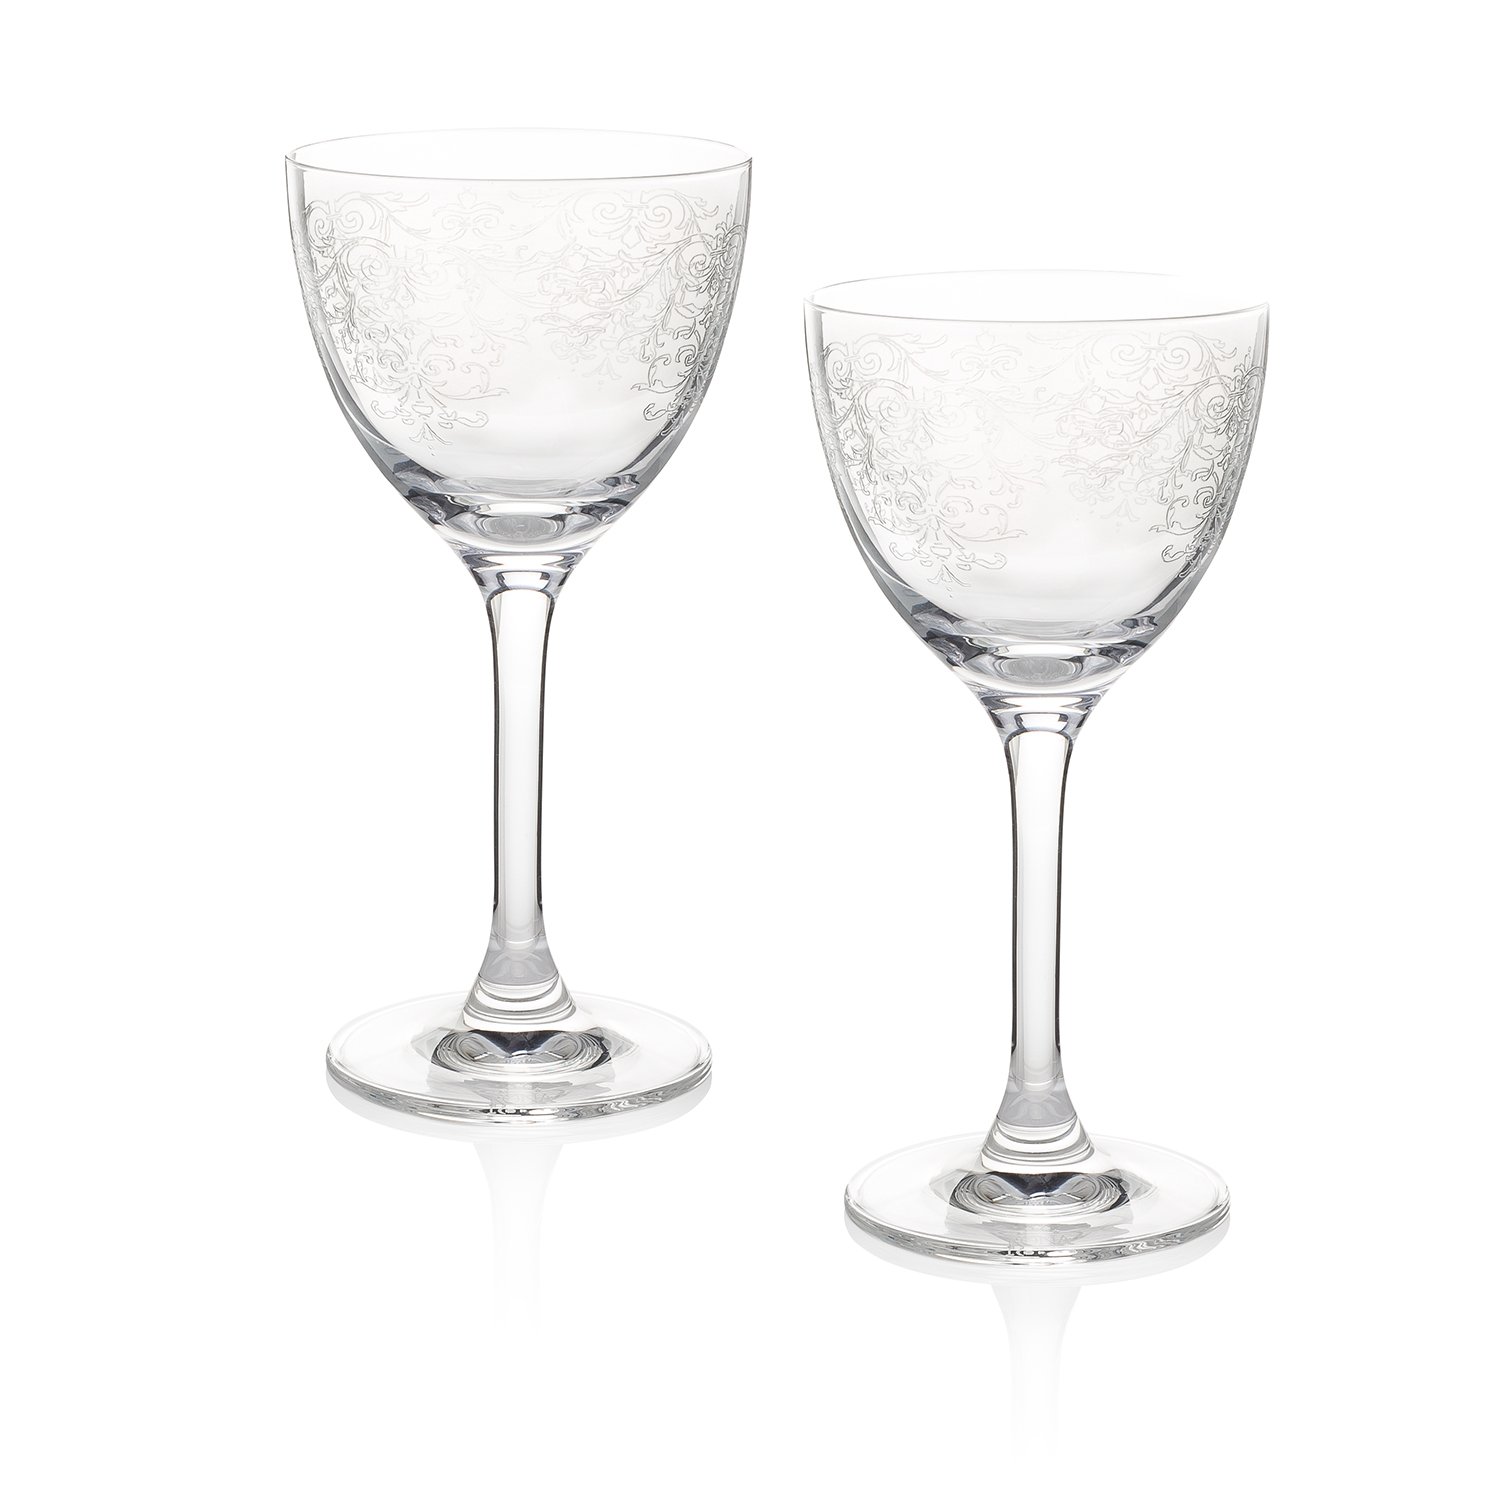 "The Bacall Collection" Ciro's of Hollywood Coupette Cocktail Glass 2-Piece Set (Gift Box)